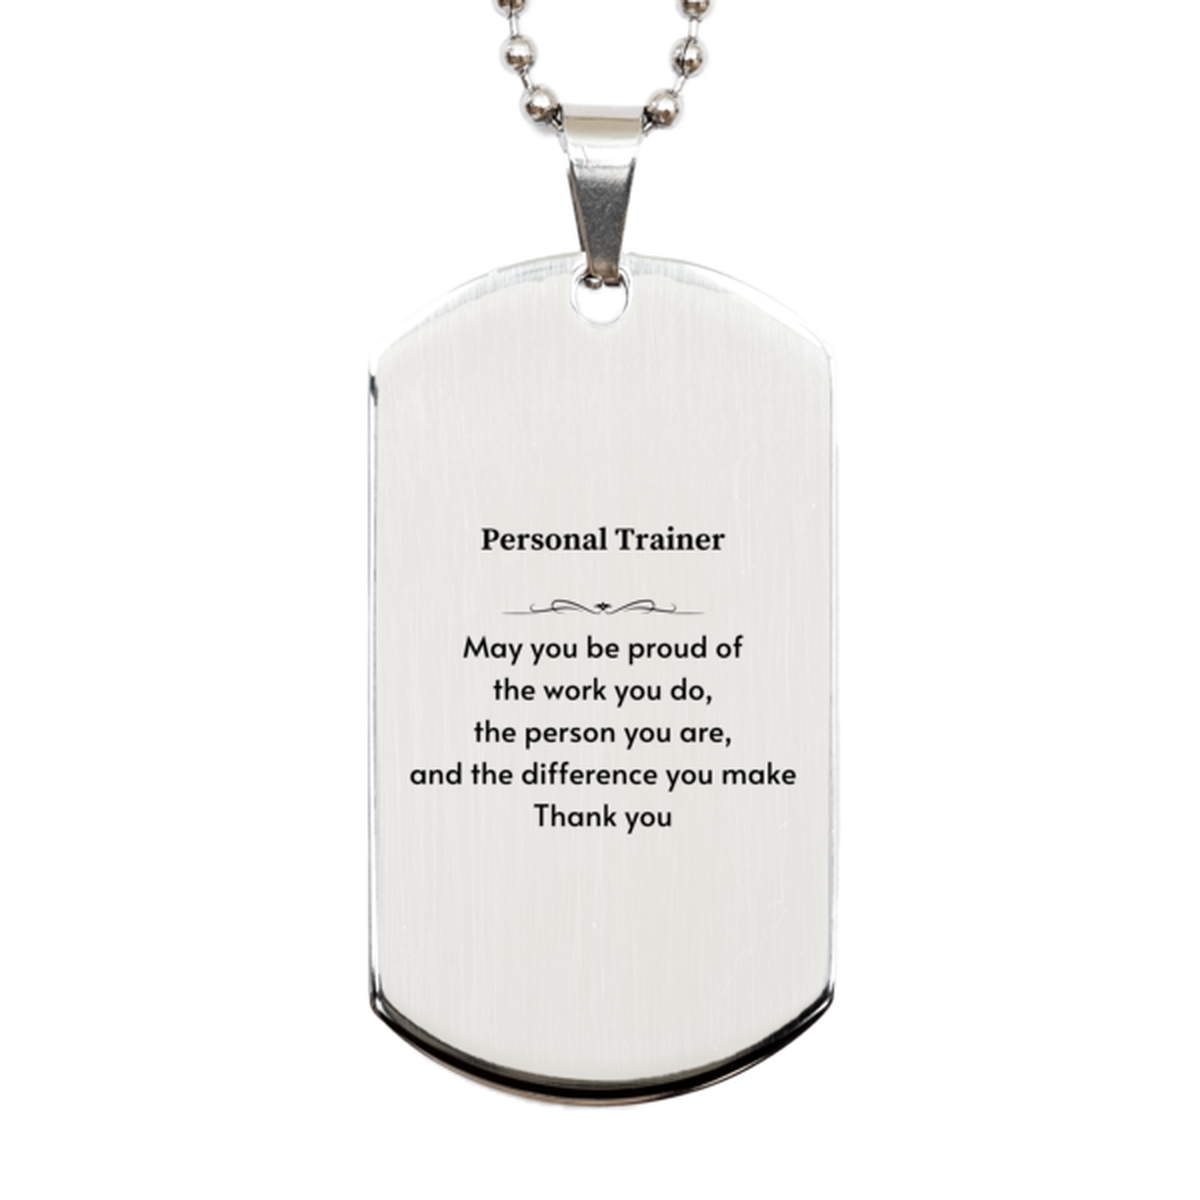 Heartwarming Silver Dog Tag Retirement Coworkers Gifts for Personal Trainer, Personal Trainer May You be proud of the work you do, the person you are Gifts for Boss Men Women Friends